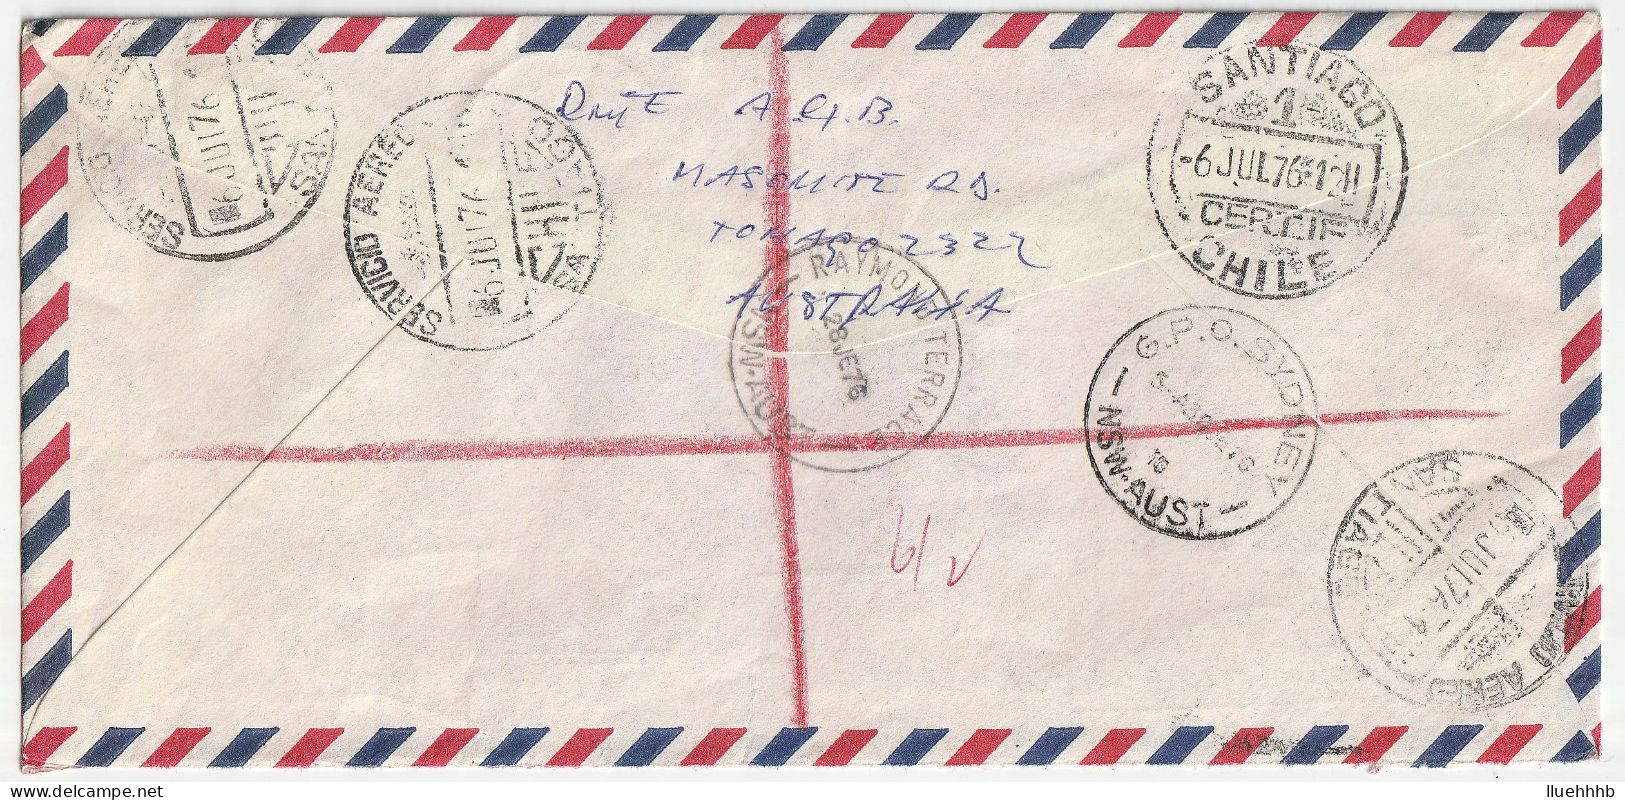 AUSTRALIA: 1976 Registered Airmail Cover To CHILE, $2 Hans Heysen Painting - Postal Stationery